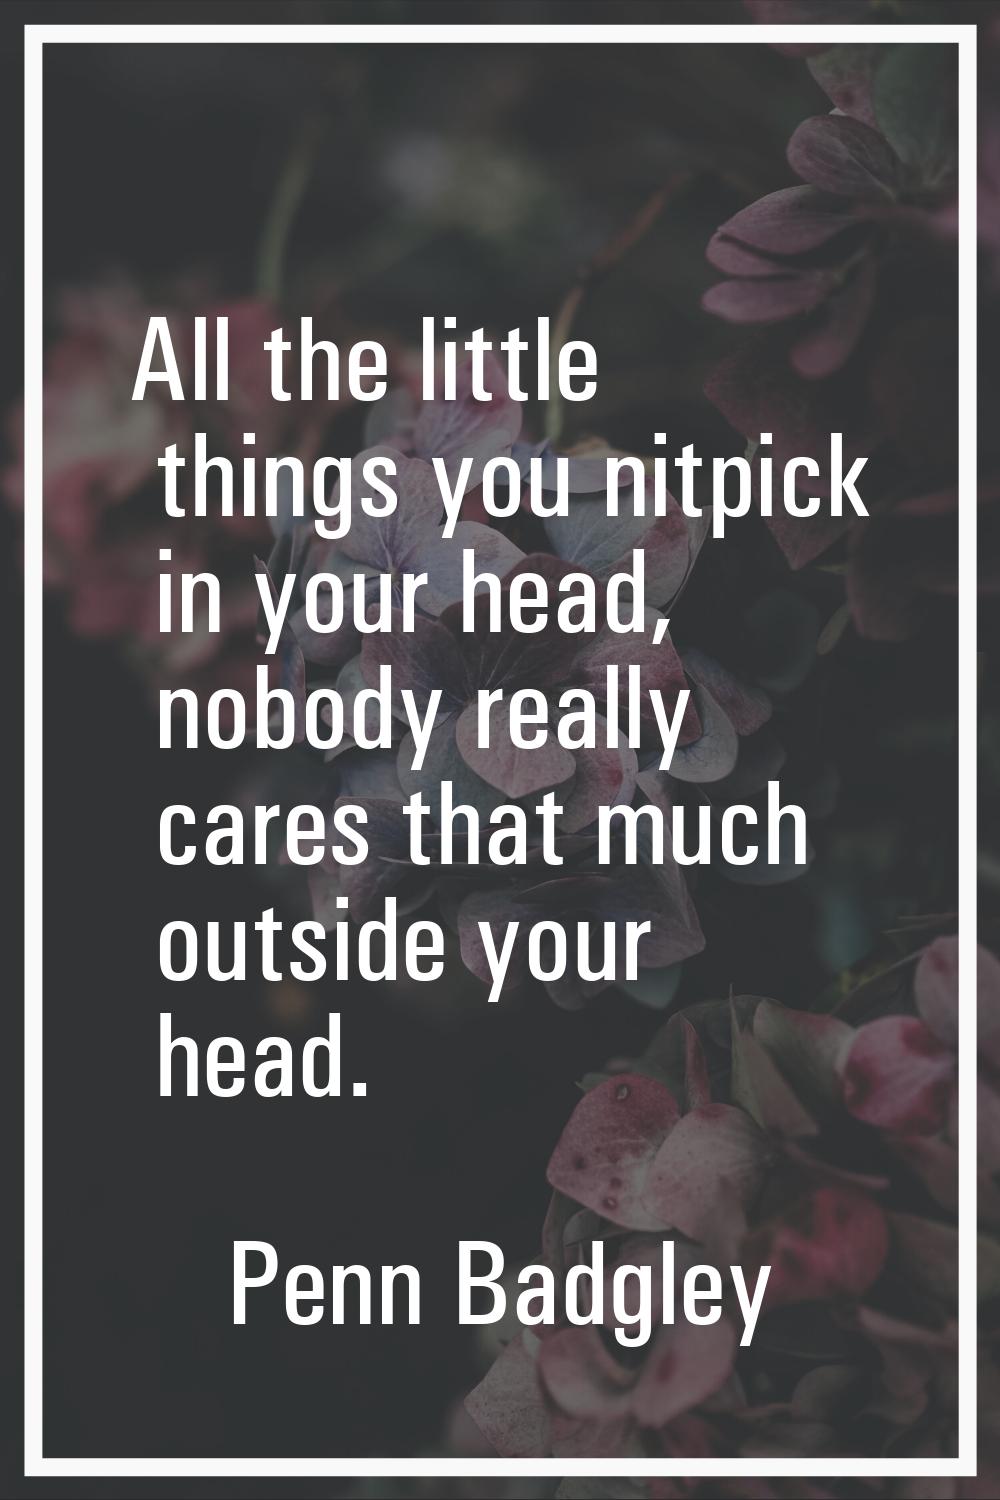 All the little things you nitpick in your head, nobody really cares that much outside your head.